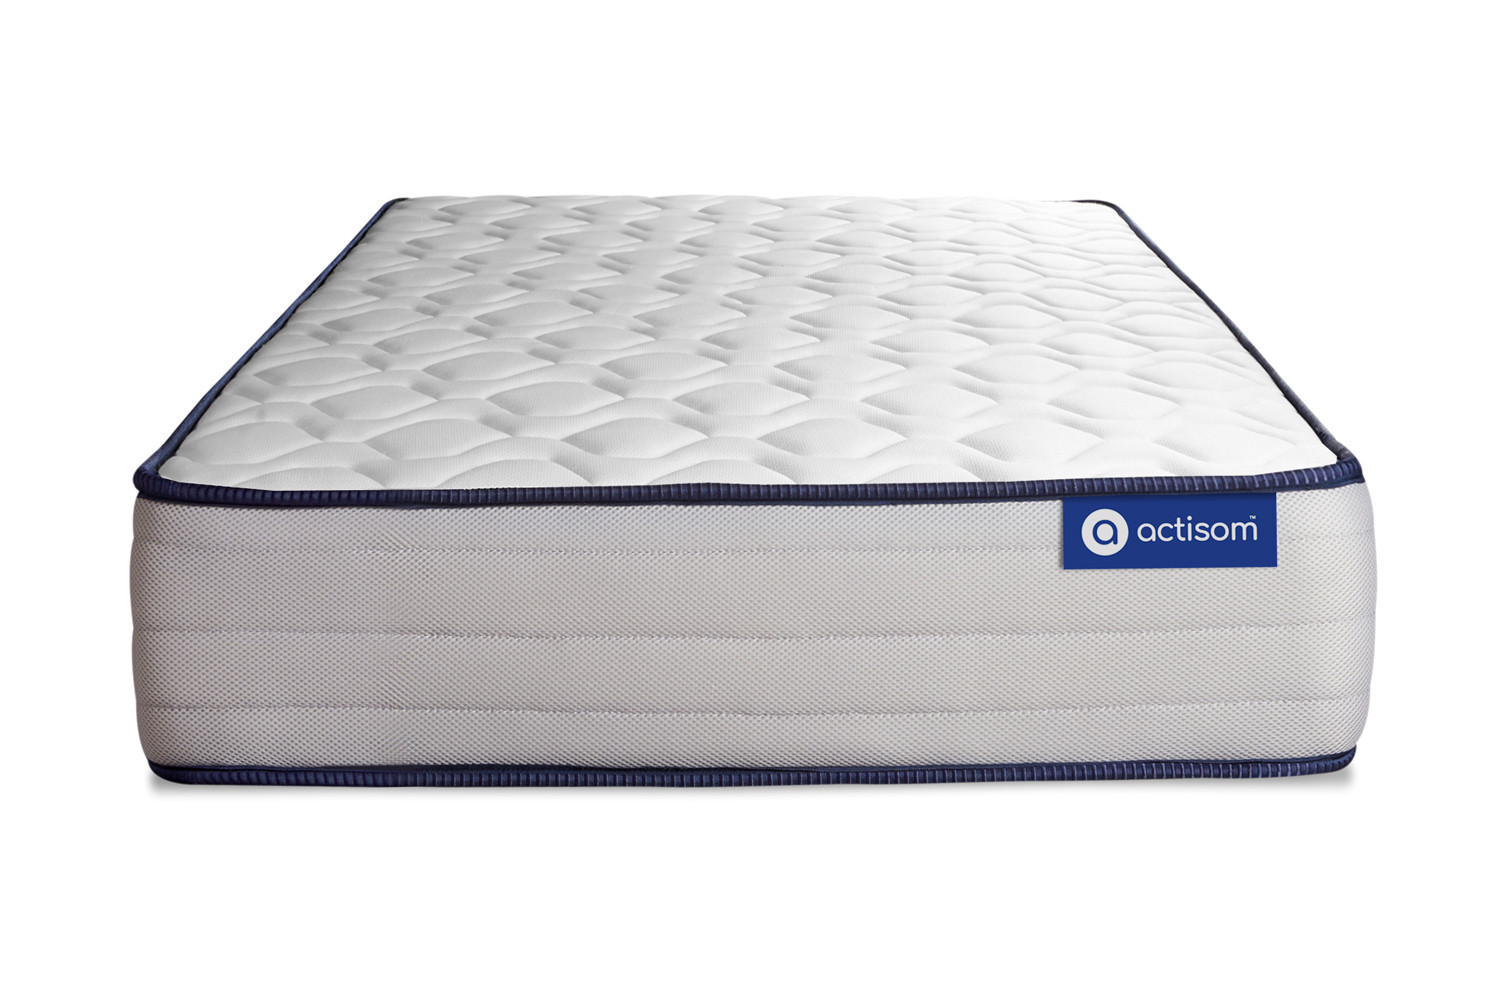 Matelas 1 place - Actisom - Actimemo form - Réf : ACTMEMFOR120200